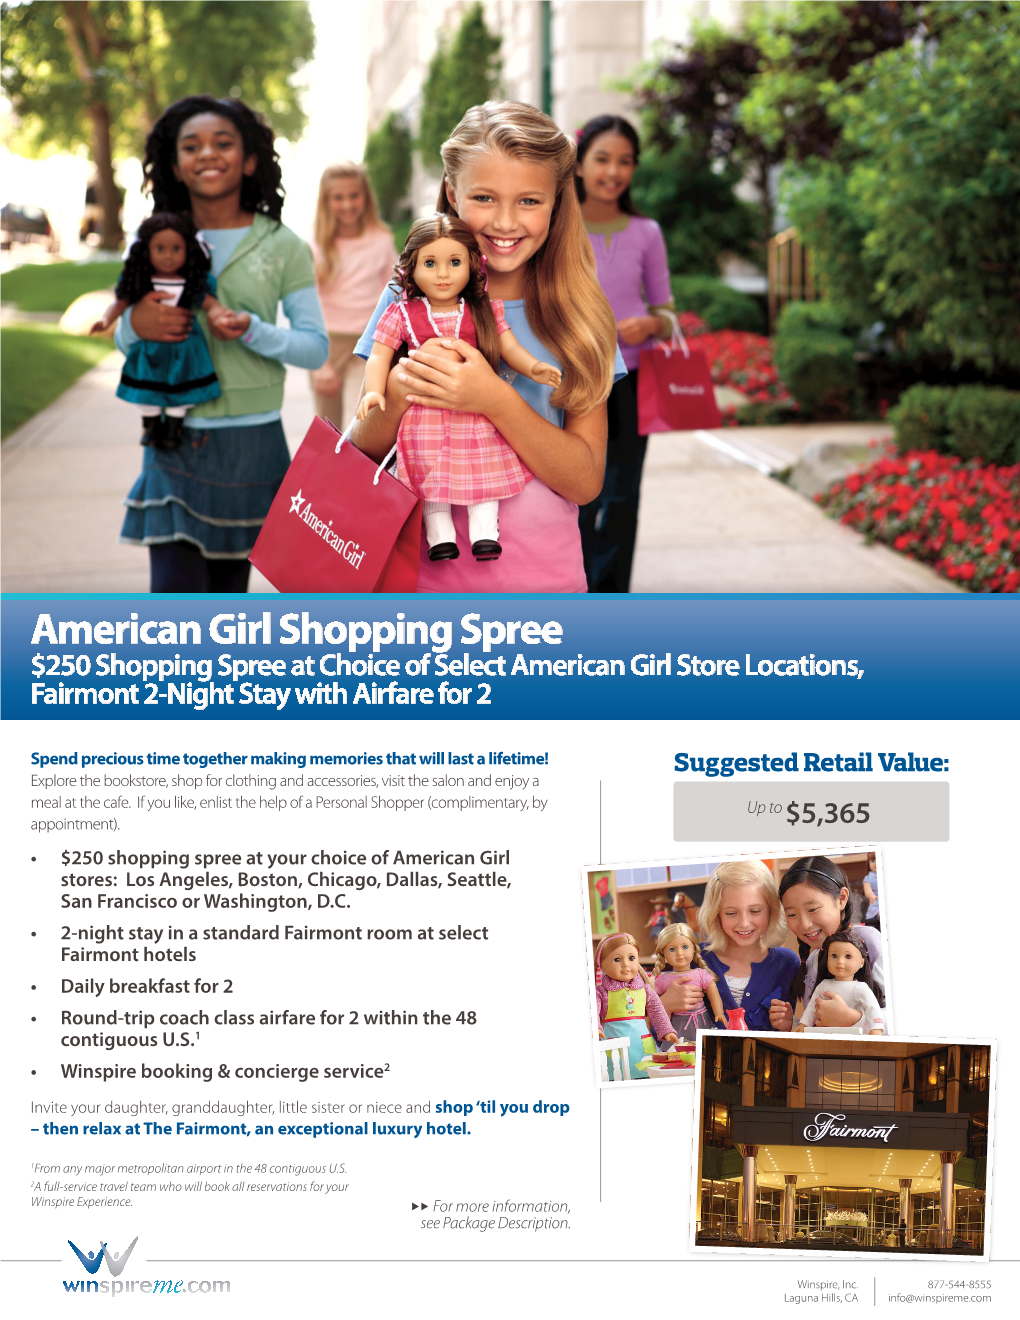 American Girl Shopping Spree $250 Shopping Spree at Choice of Select American Girl Store Locations, Fairmont 2-Night Stay with Airfare for 2